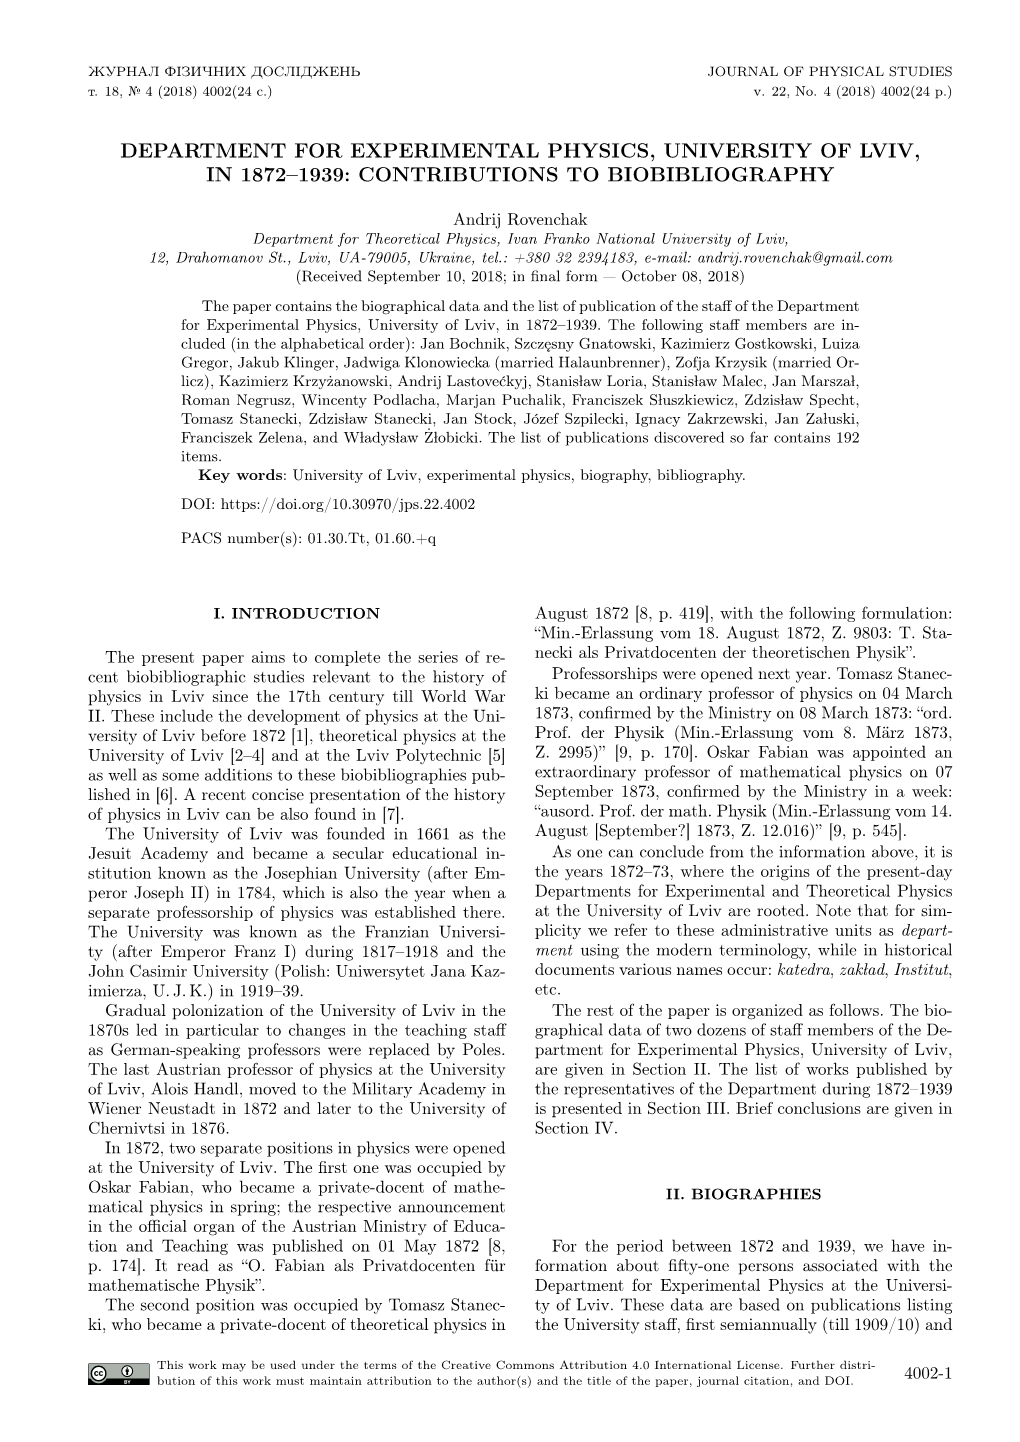 Department for Experimental Physics, University of Lviv, in 1872–1939: Contributions to Biobibliography